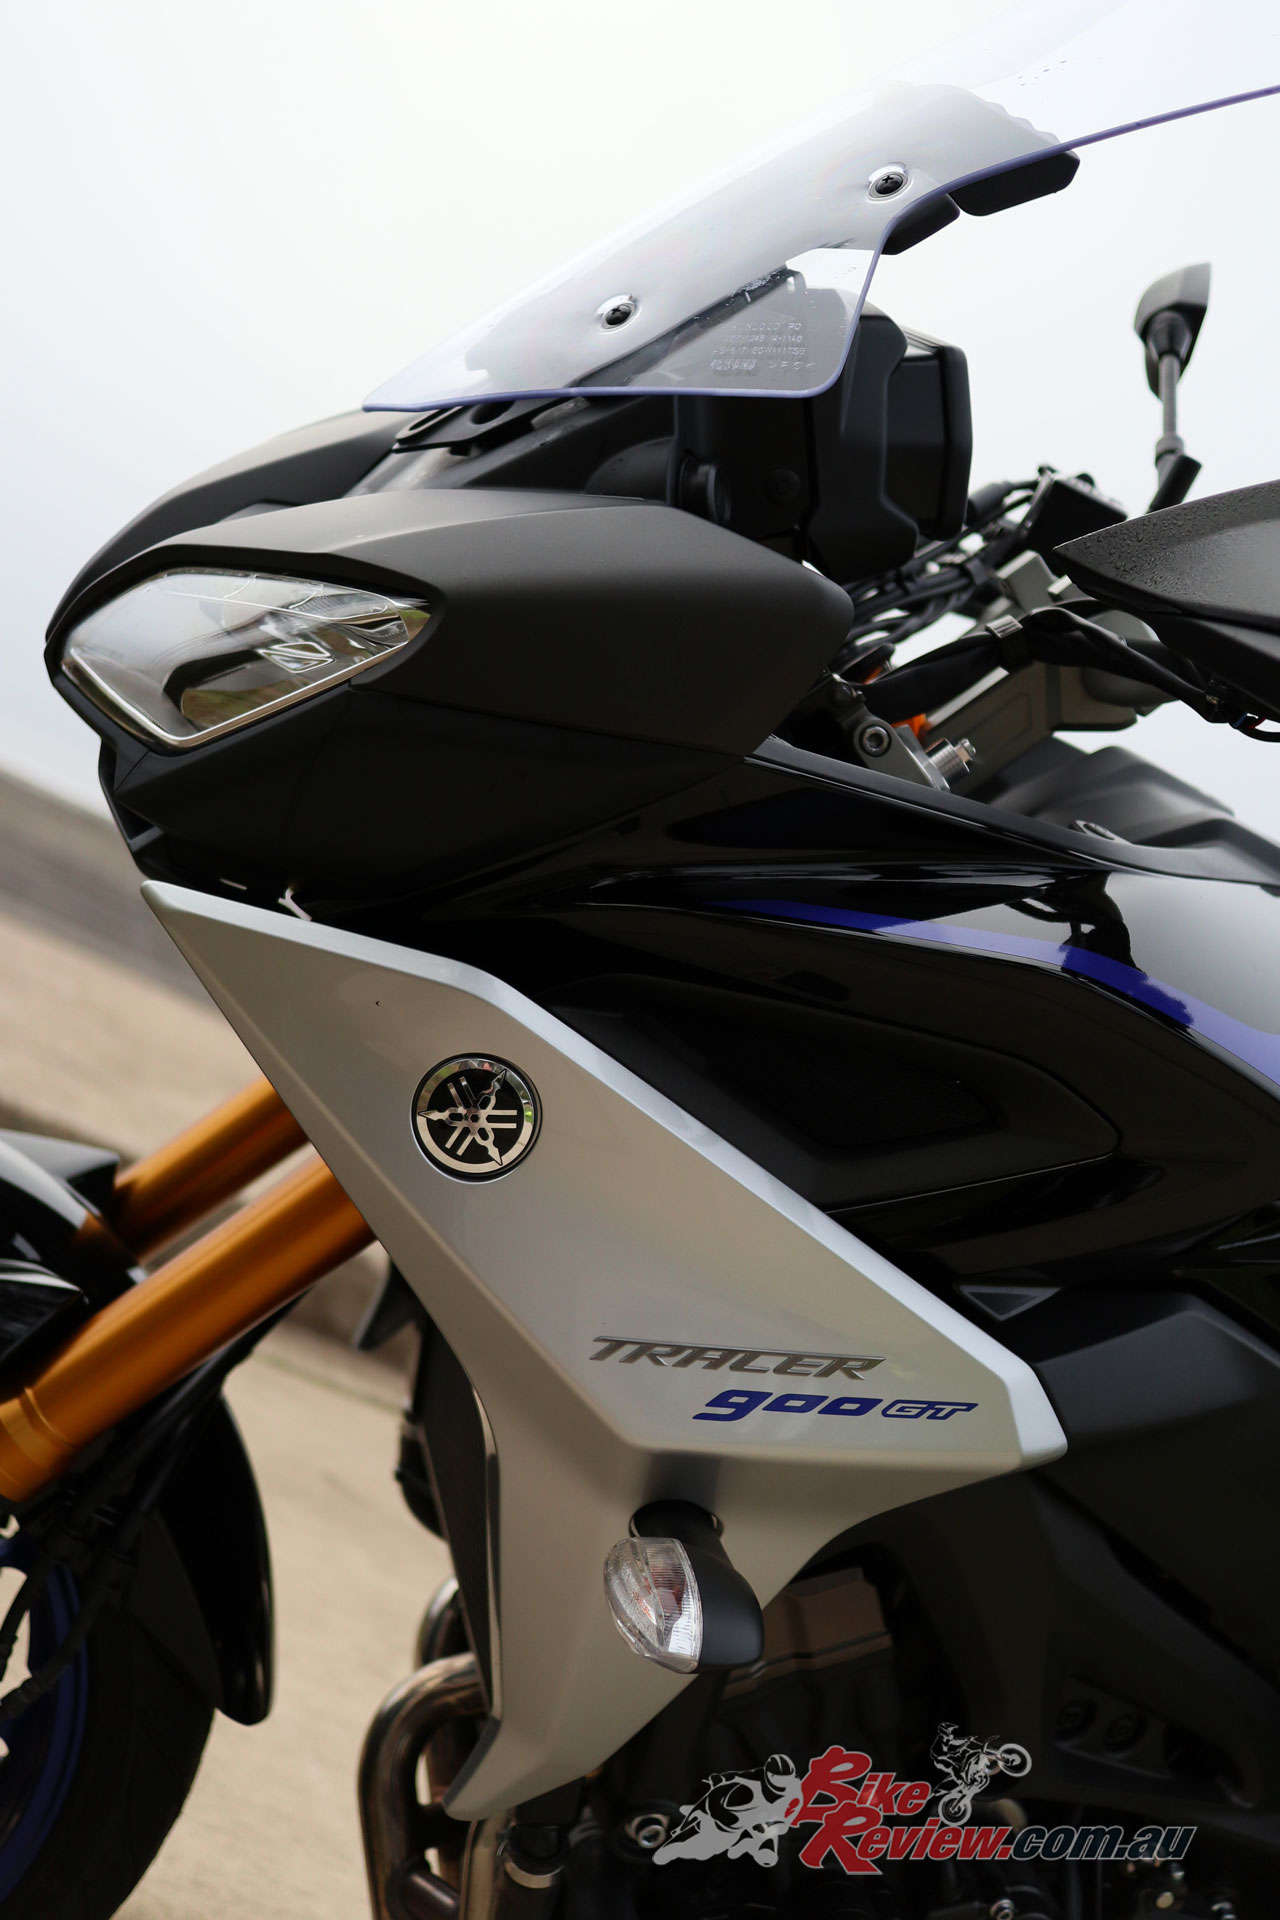 The 2019 Yamaha Tracer 900 GT demands a $2700 premium over the standard Tracer 900